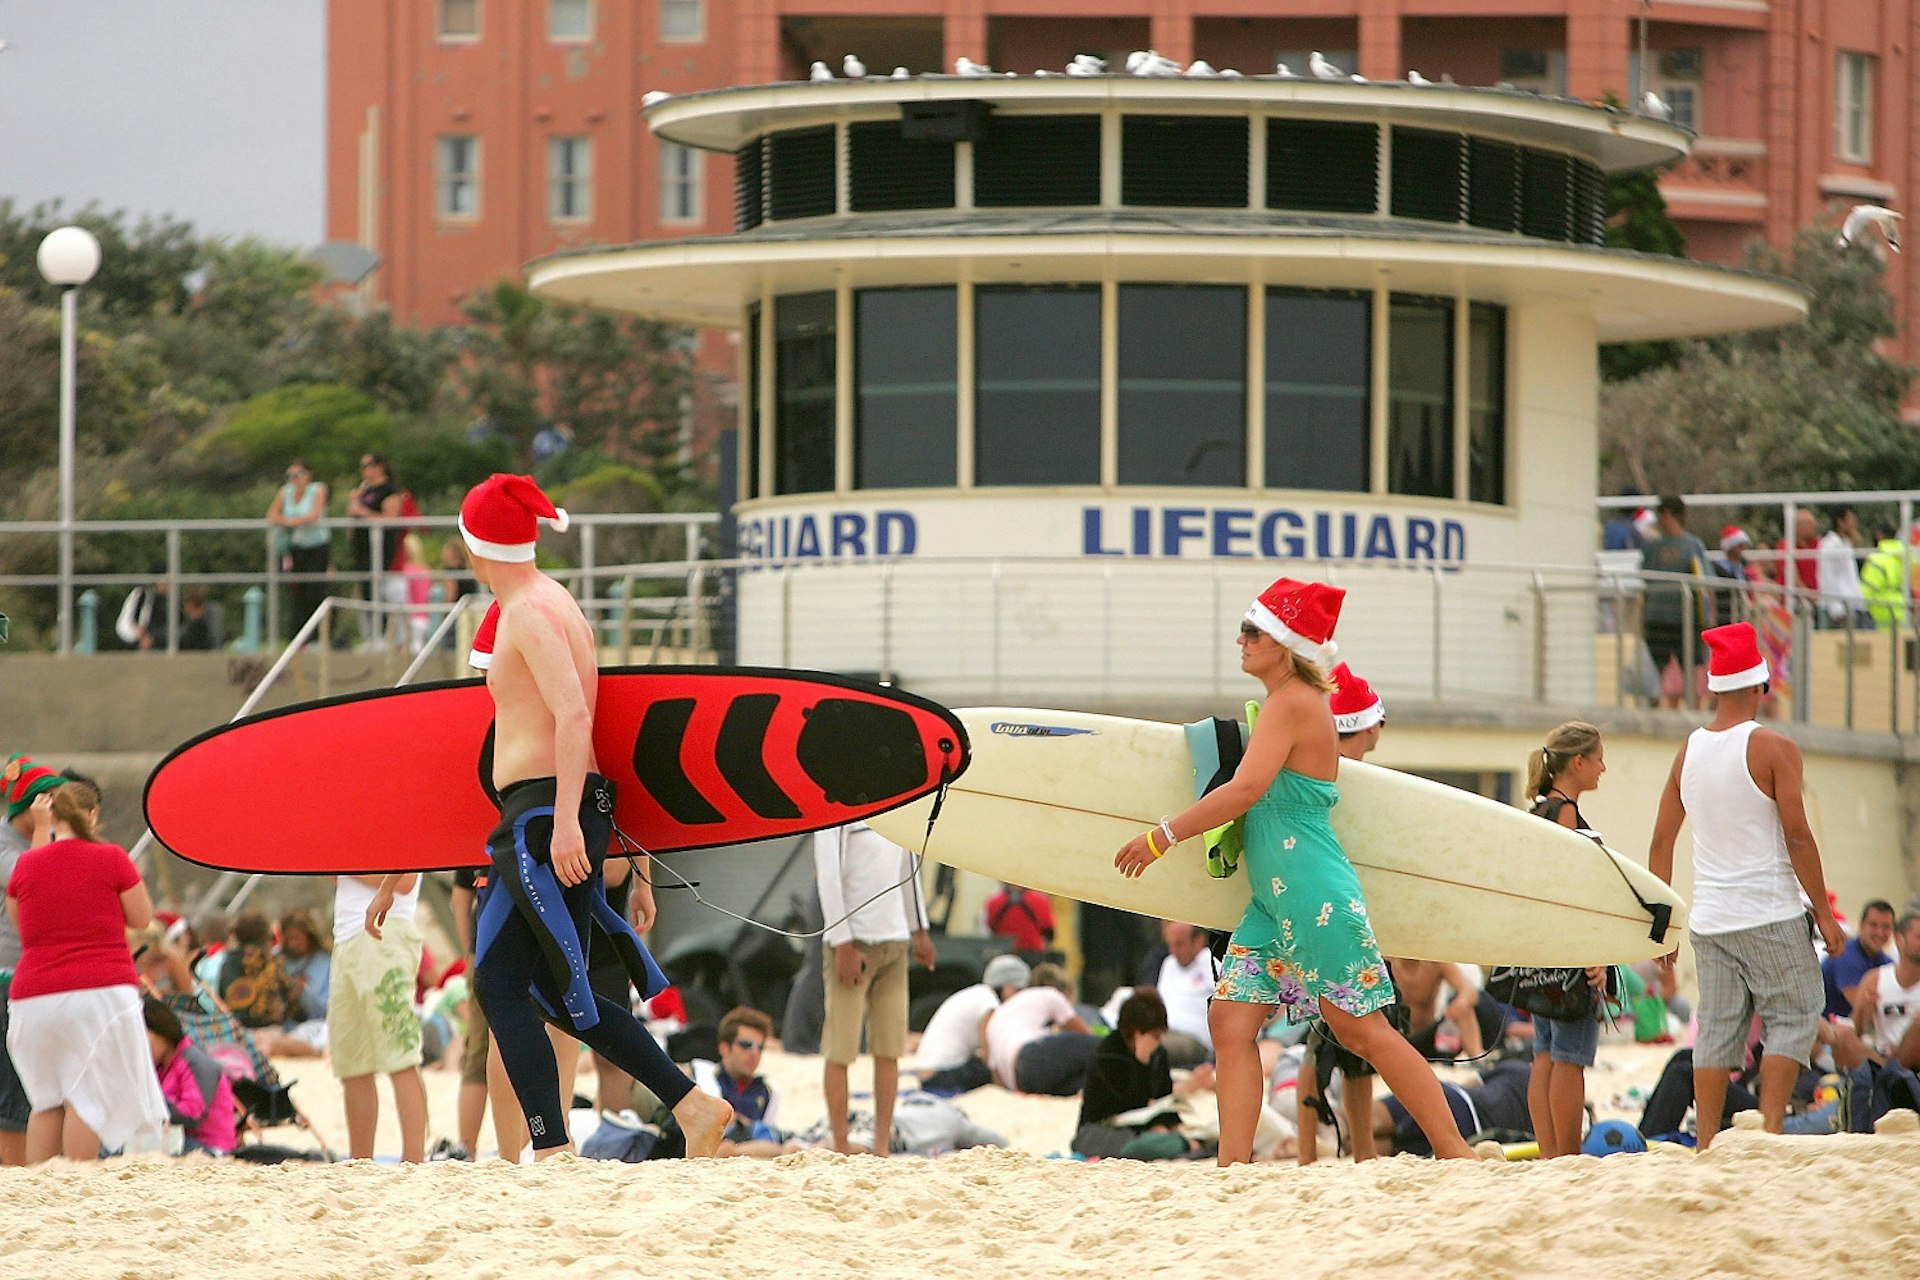 SYDNEY, AUSTRALIA - DECEMBER 25: Surfers wear Santa hats as walk down Bondi Beach on December 25, 2007 in Sydney, Australia. Bondi Beach is a popular destination for tourists on Christmas Day. (Photo by Ezra Shaw/Getty Images)